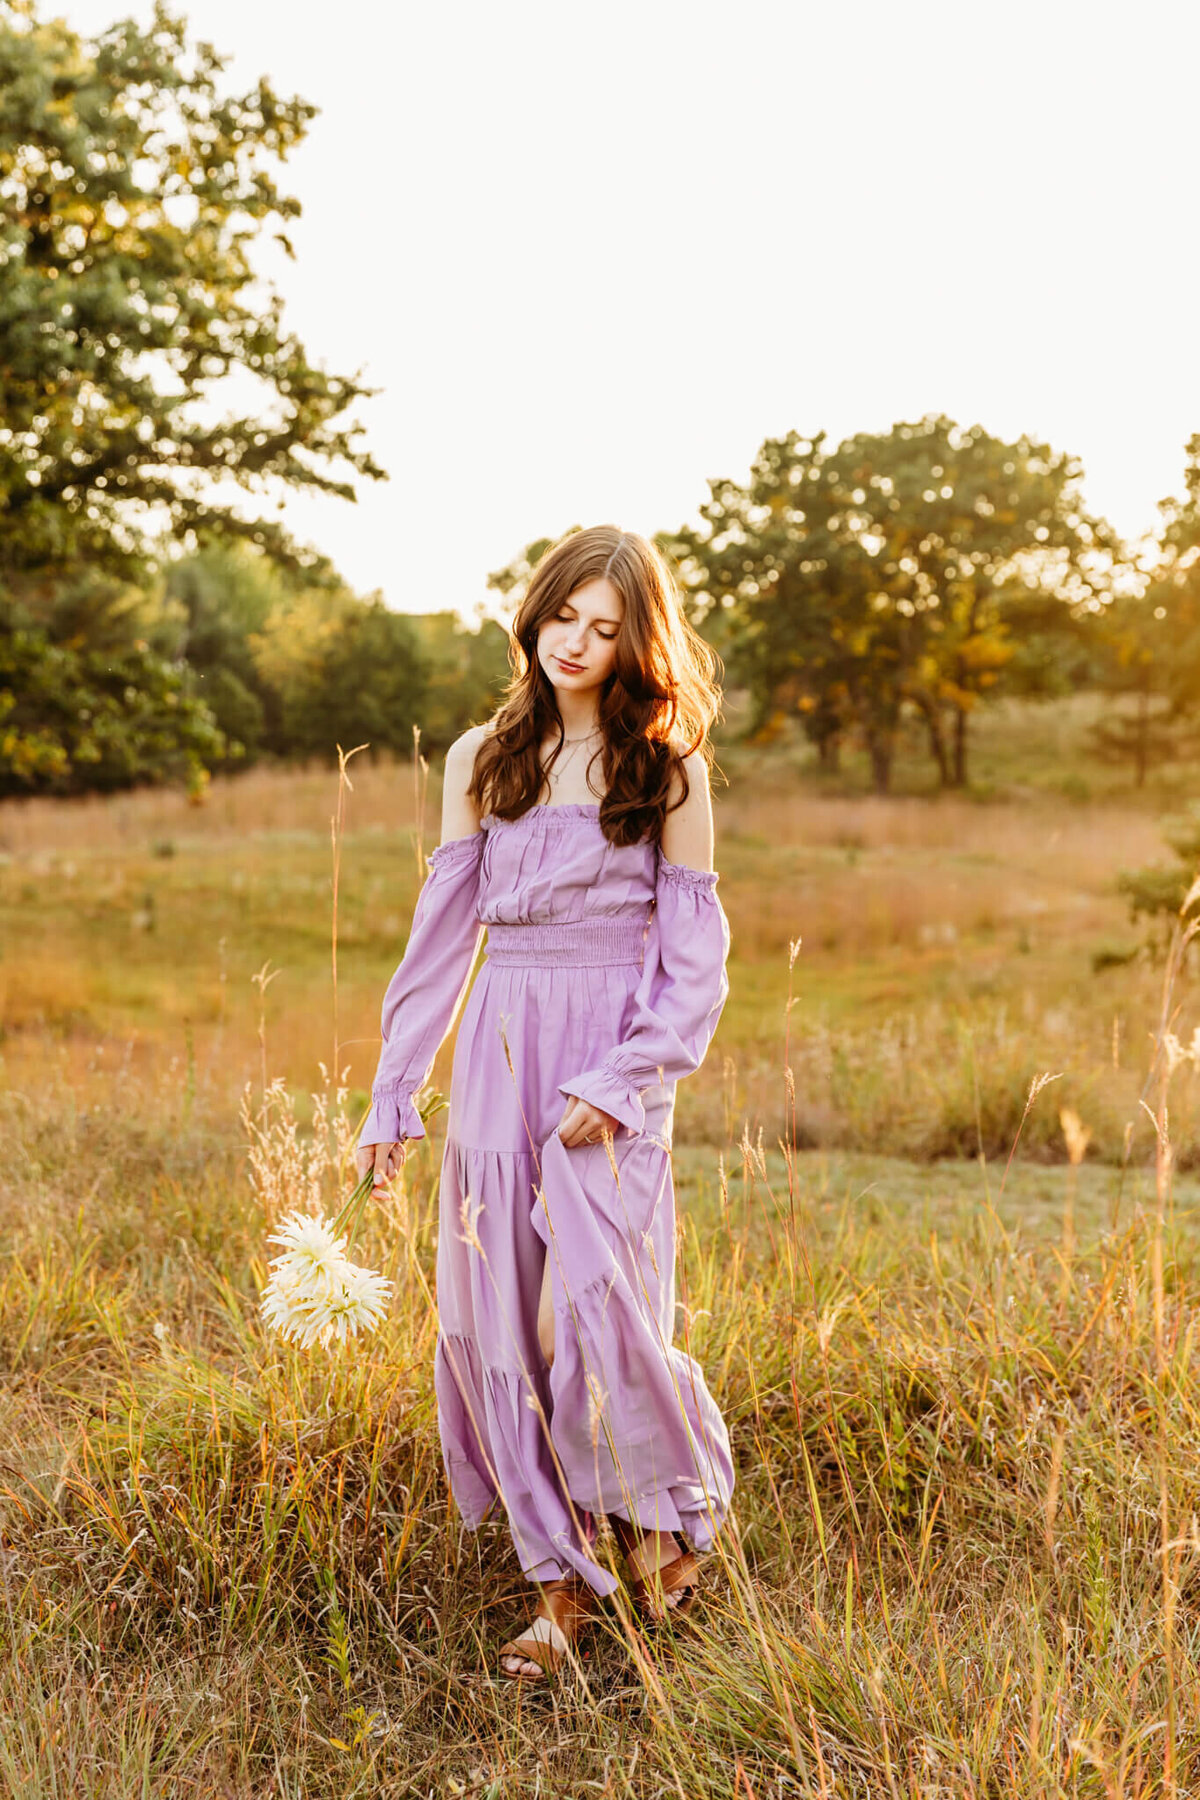 brown haired teen girl playing with long purple dress & holding flowers for senior photography session